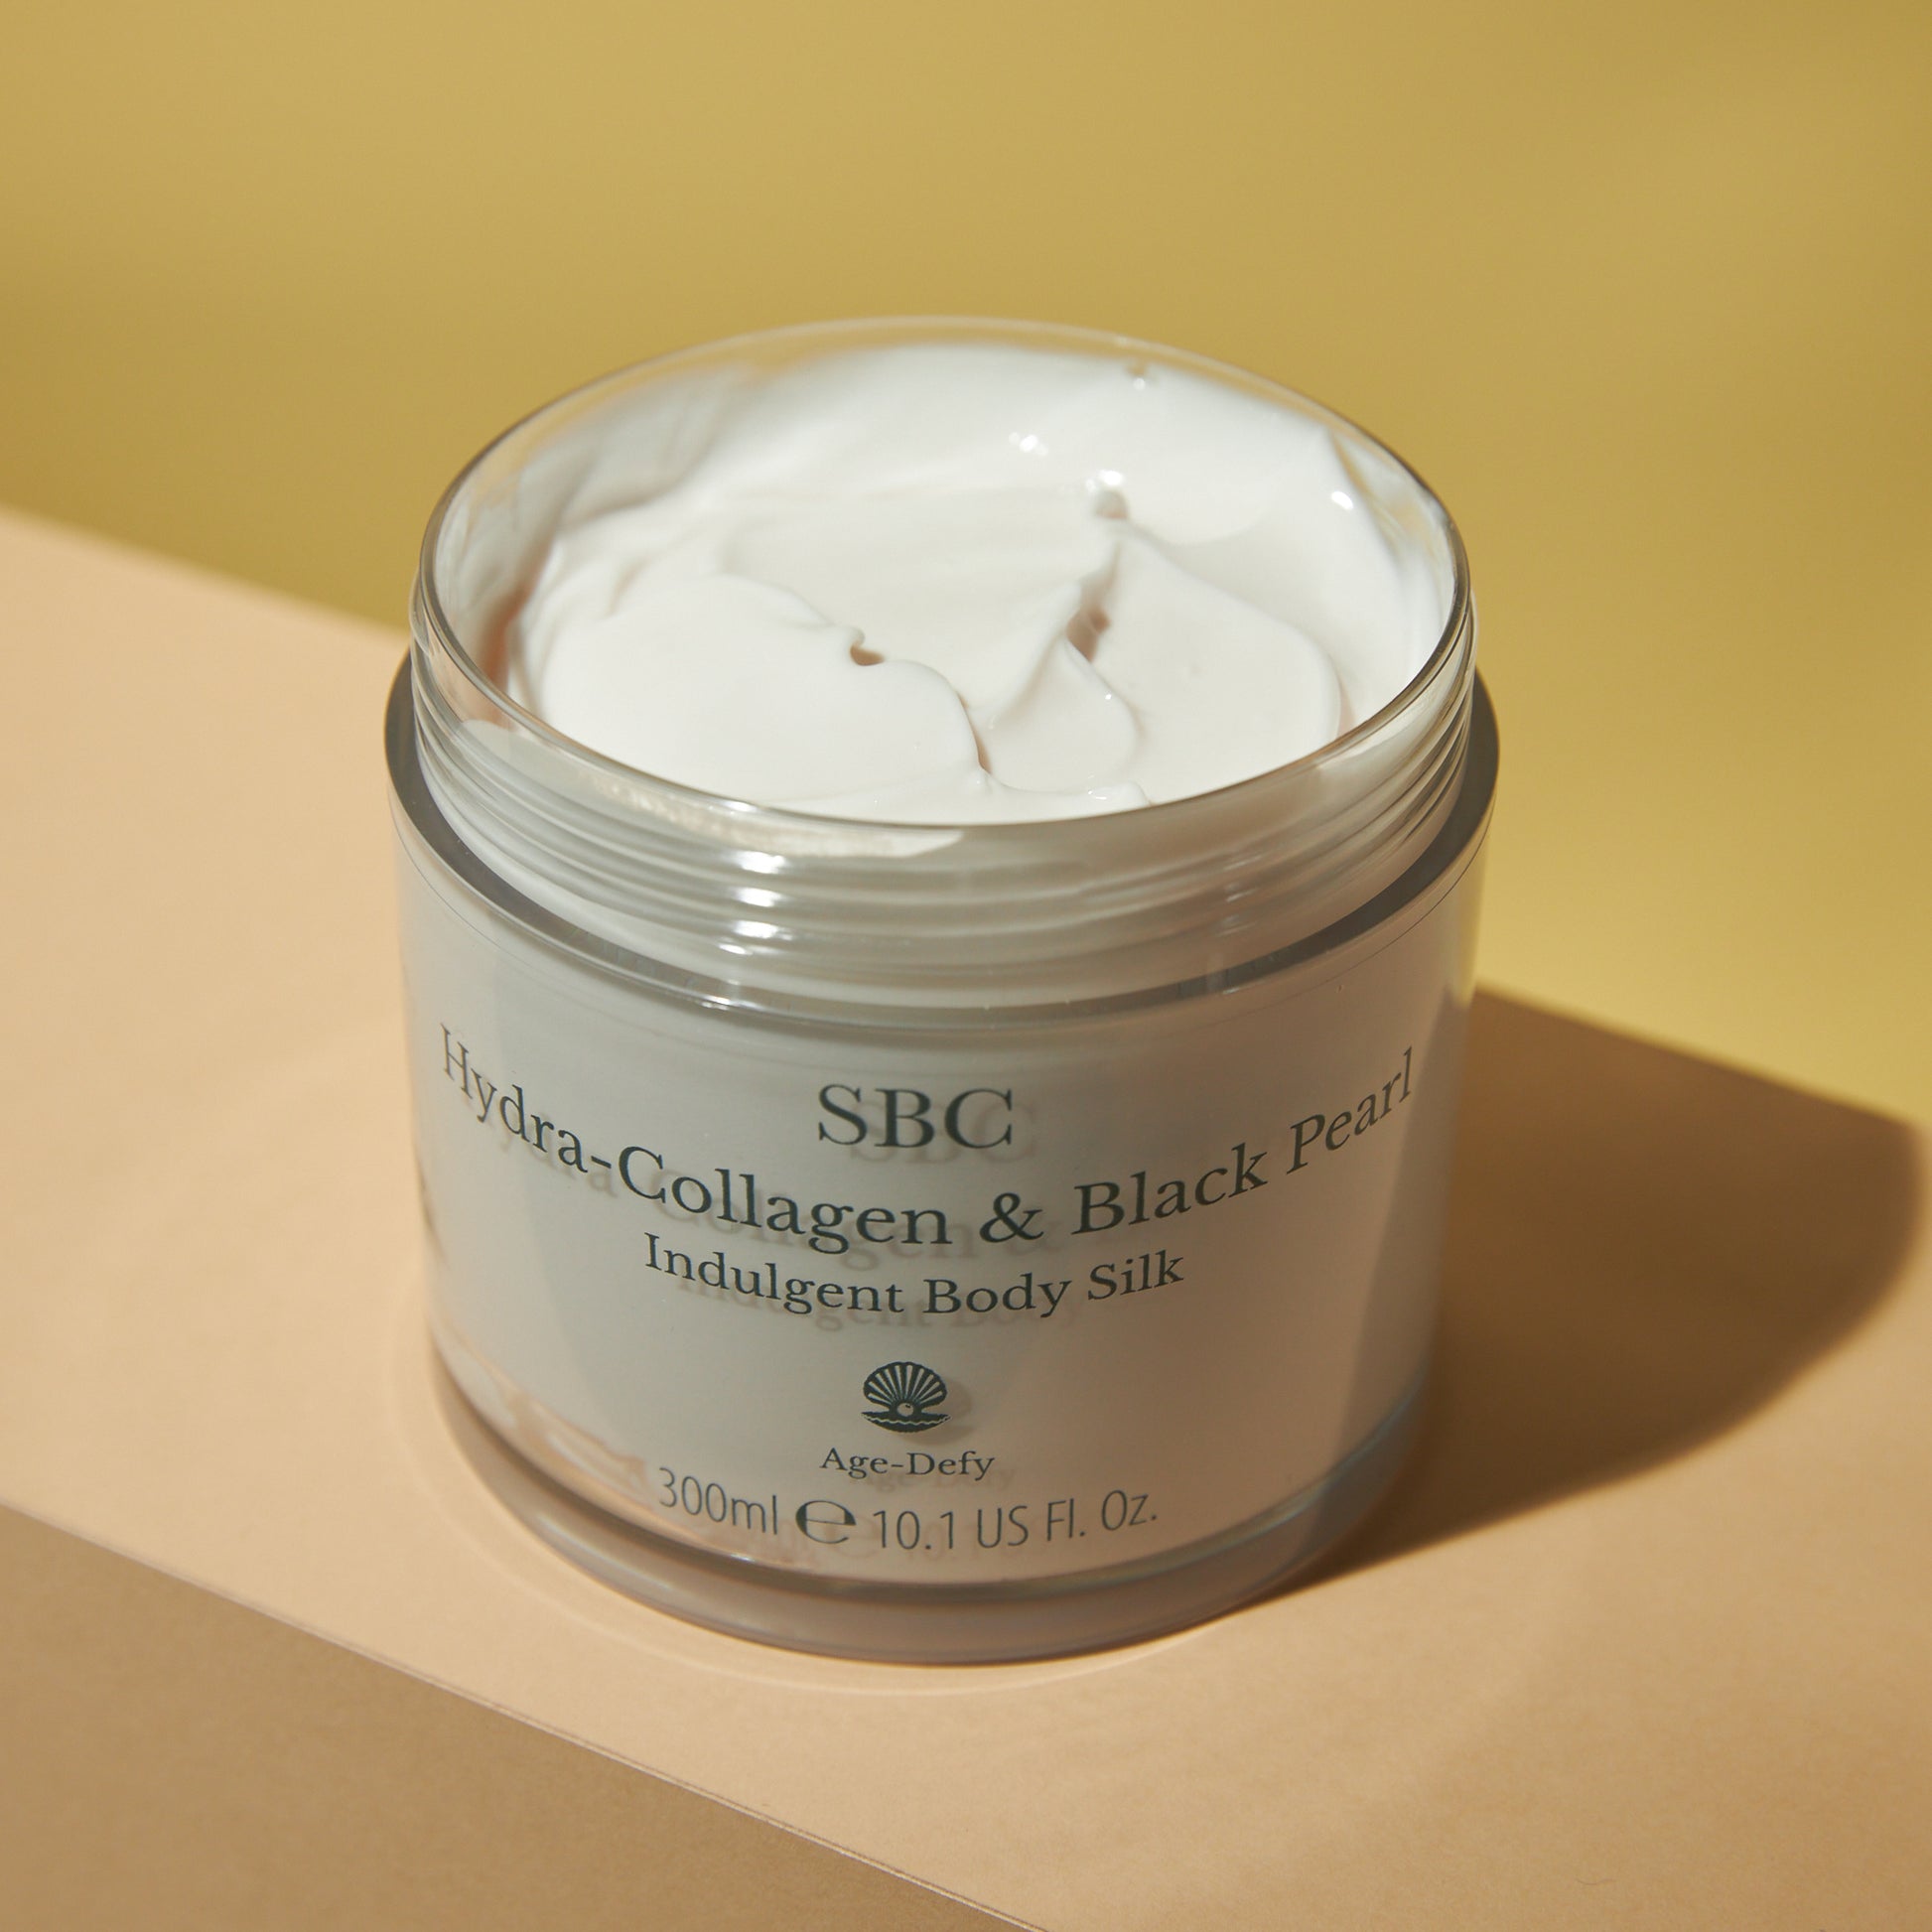 Hydra-Collagen & Black Pearl Indulgent Body Silk  on a counter with natural light 